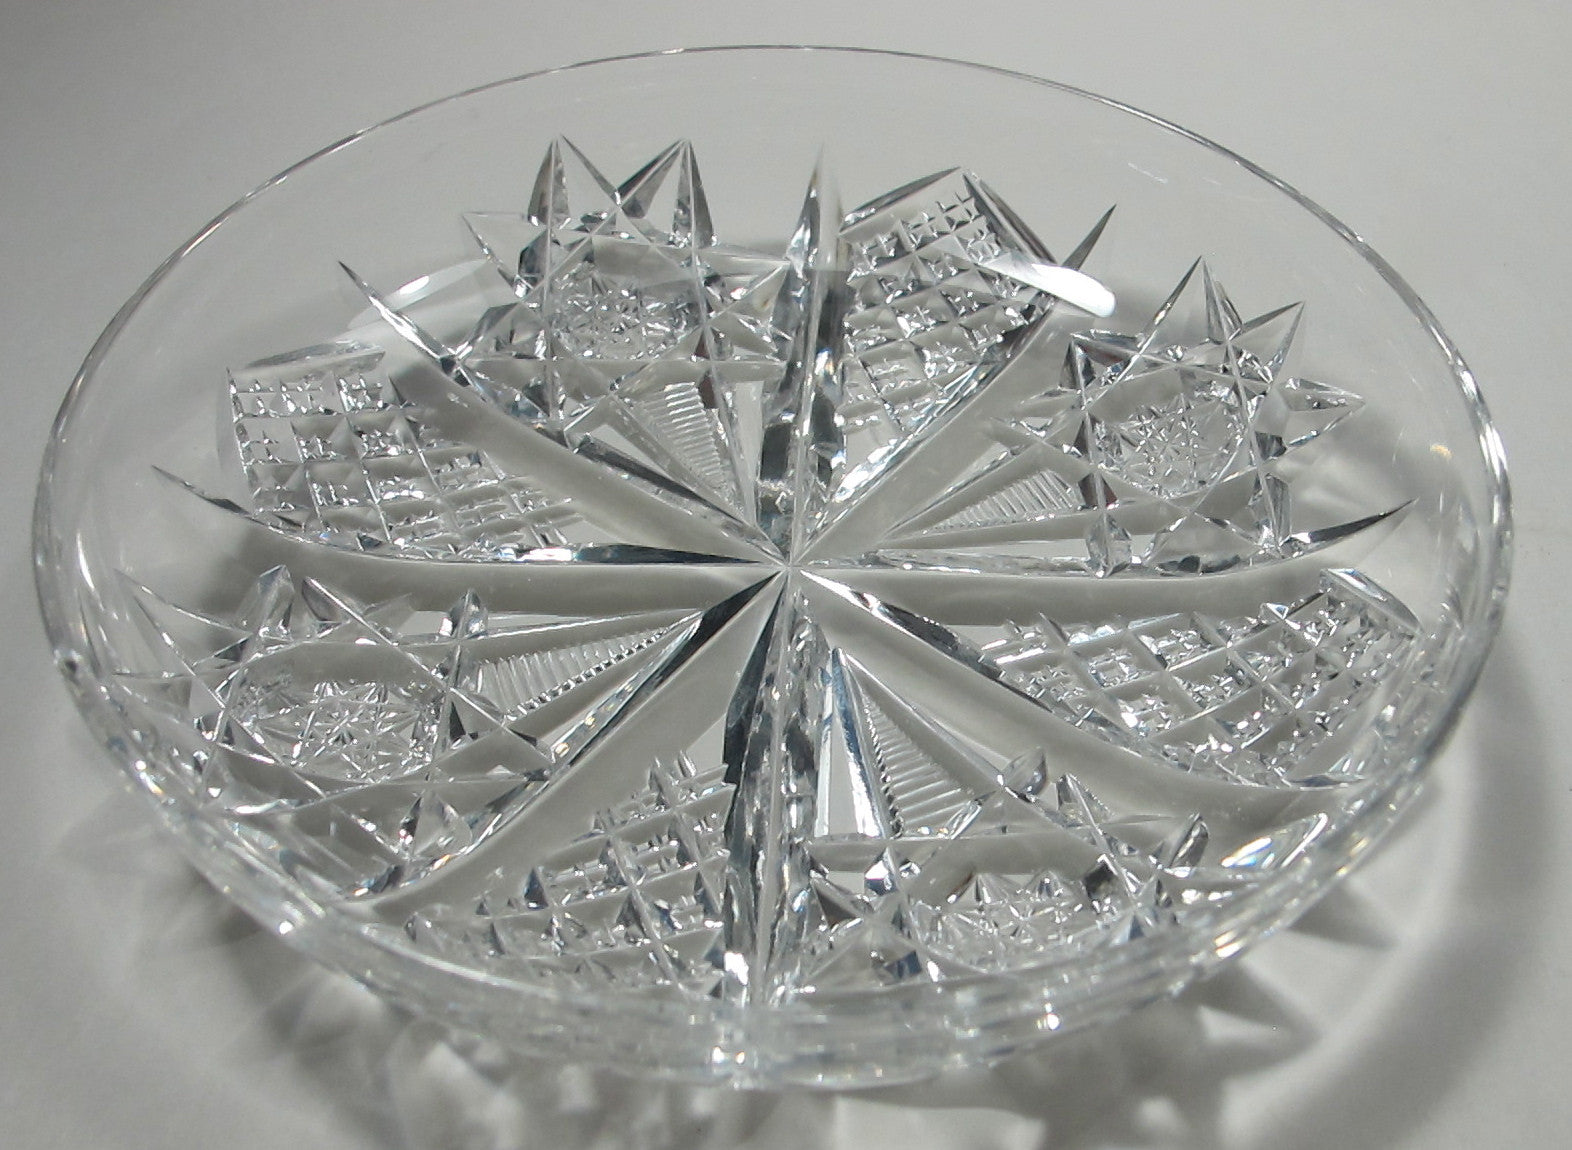 Signed Hawkes Antique Cut Glass dish American Brilliant period, ABP - O'Rourke crystal awards & gifts abp cut glass